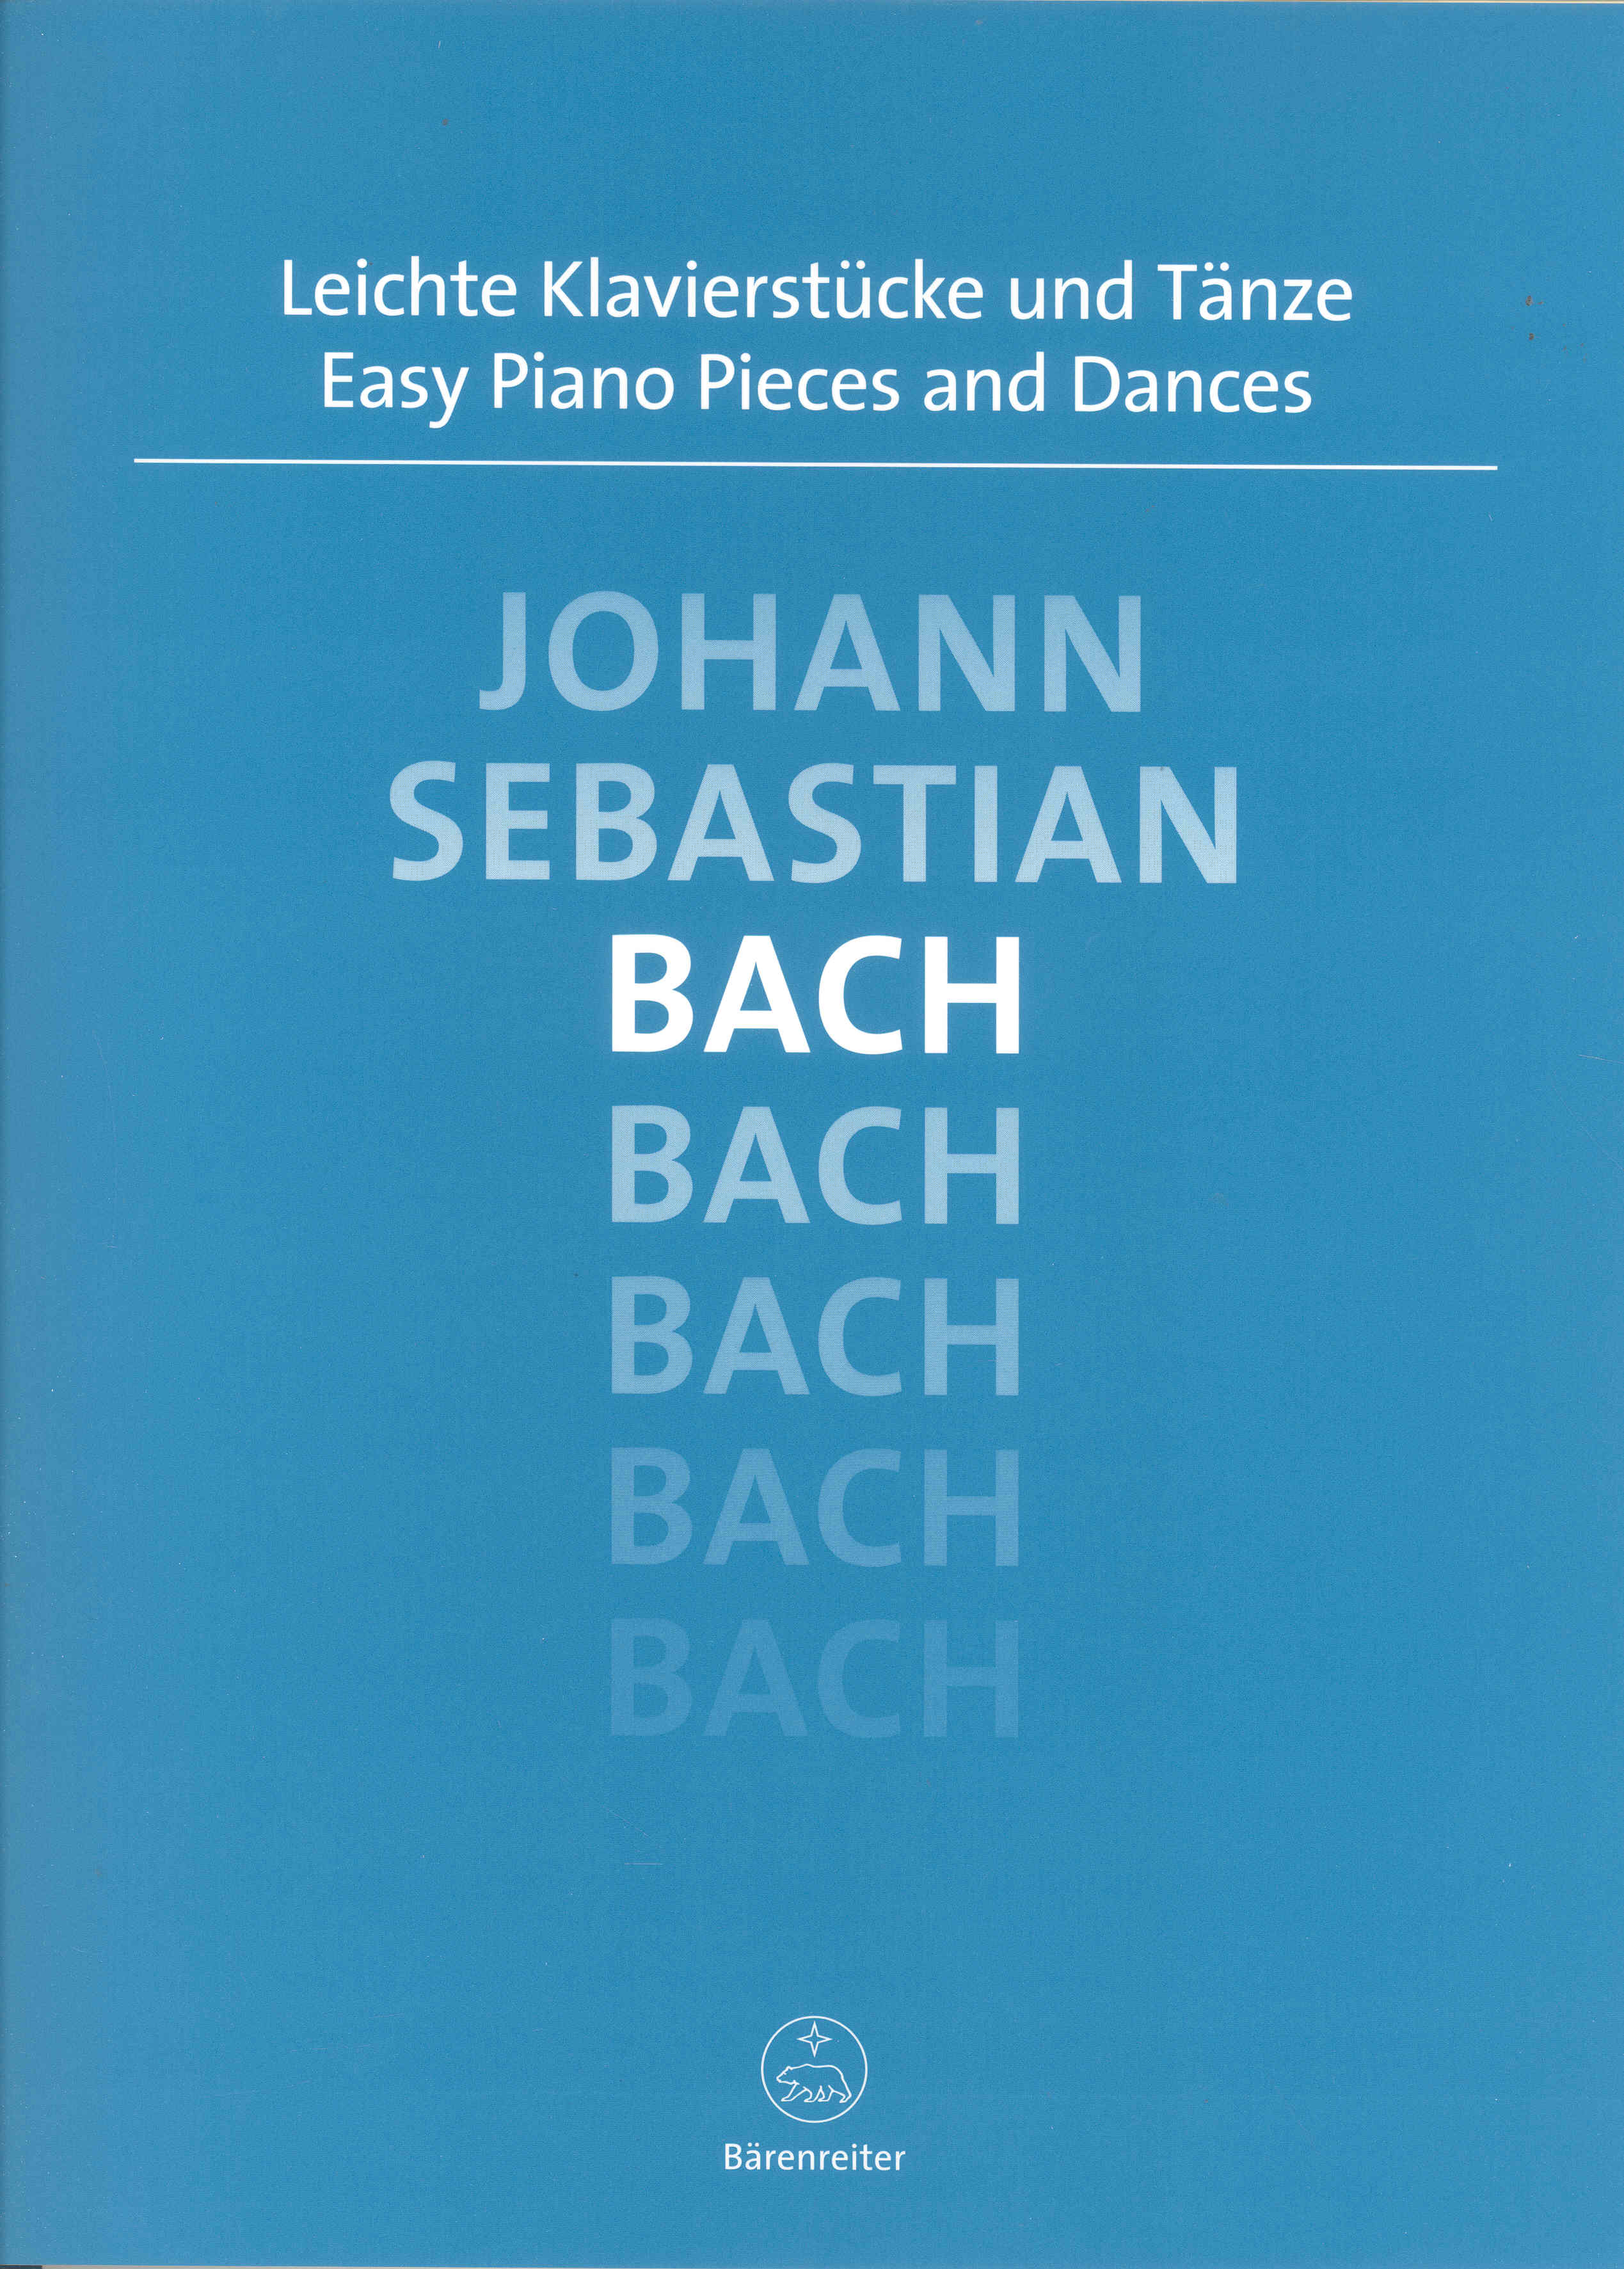 Bach Easy Piano Pieces & Dances Sheet Music Songbook